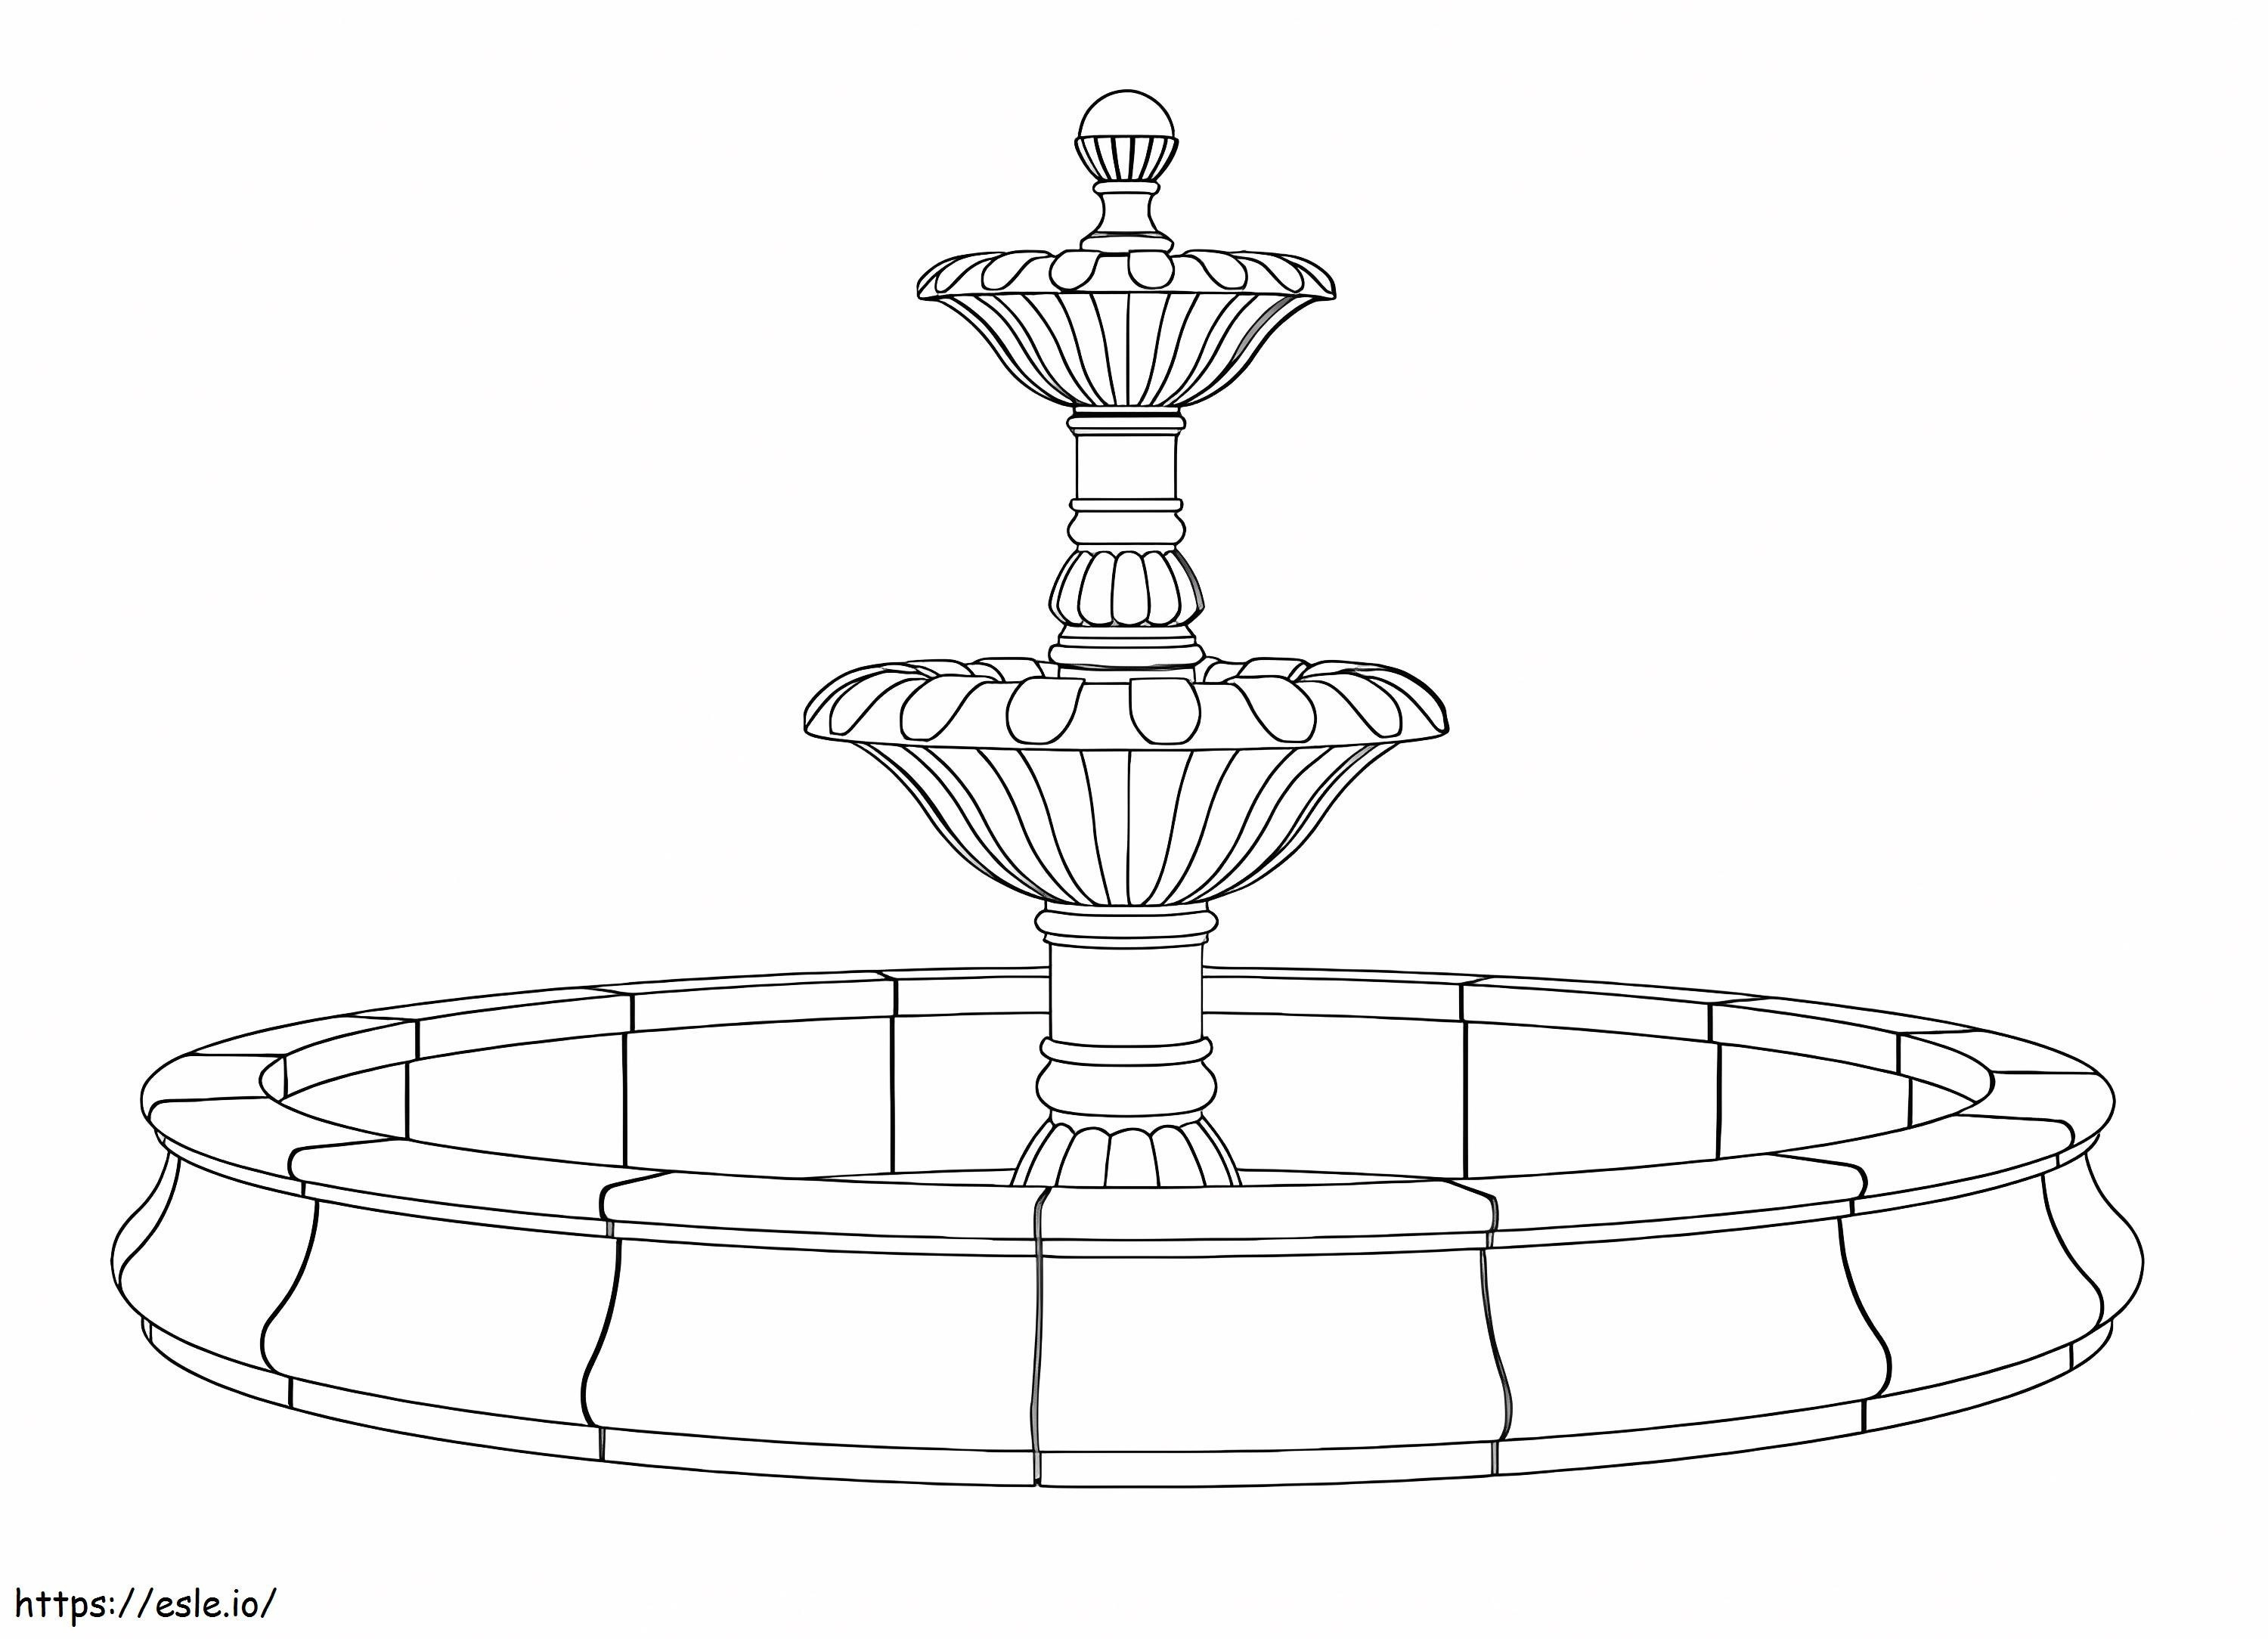 Printable Fountain coloring page